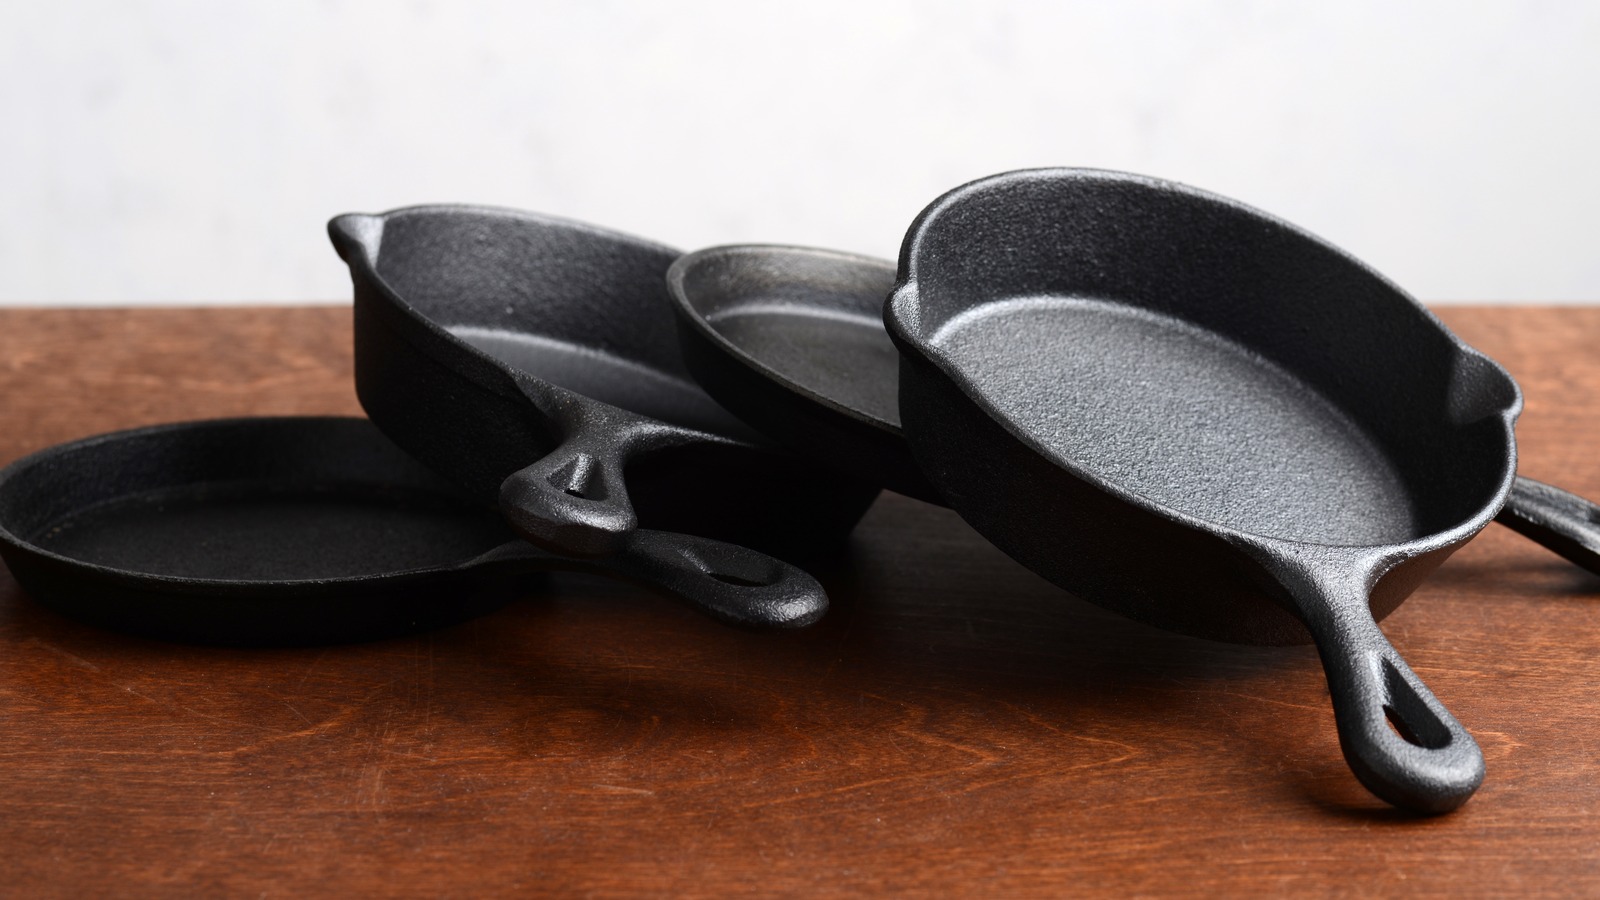 Why The Markings On Your Griswold Cast Iron Pans Don't Matter